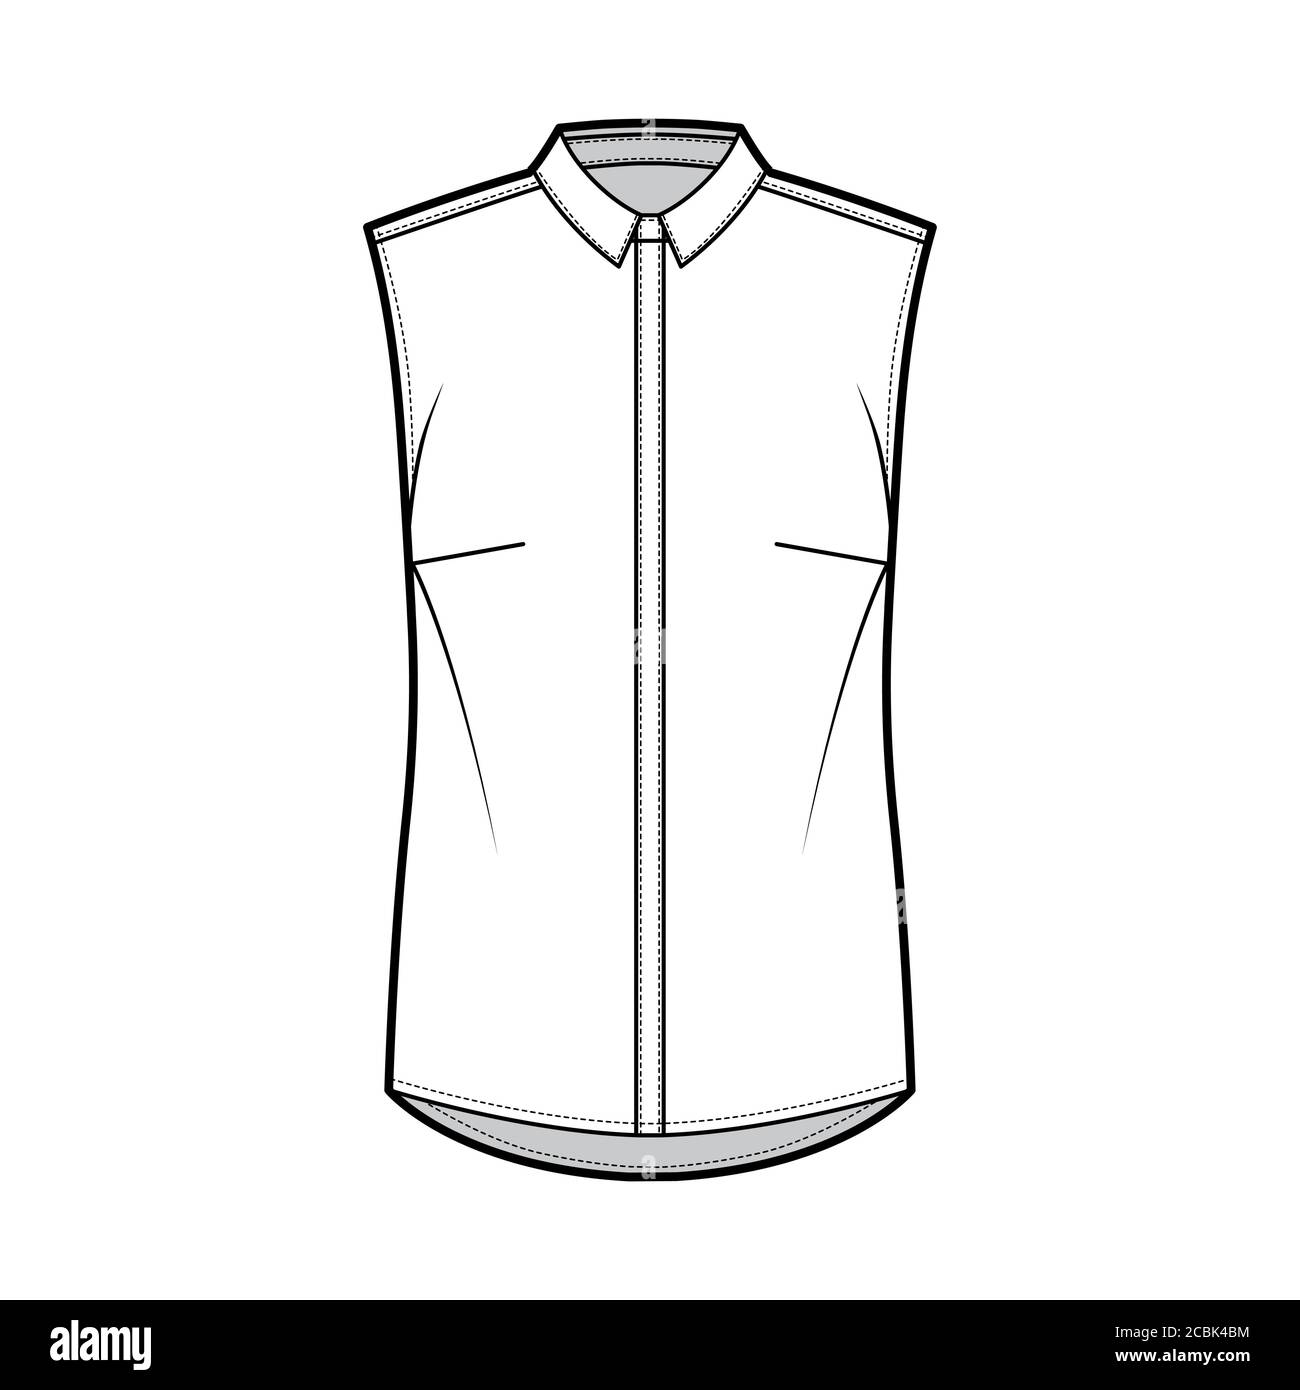 Shirt technical fashion illustration with neat, slim collar, front concealed button fastenings, slightly loose silhouette. Flat apparel template front, white color. Women, men unisex top CAD mockup Stock Vector